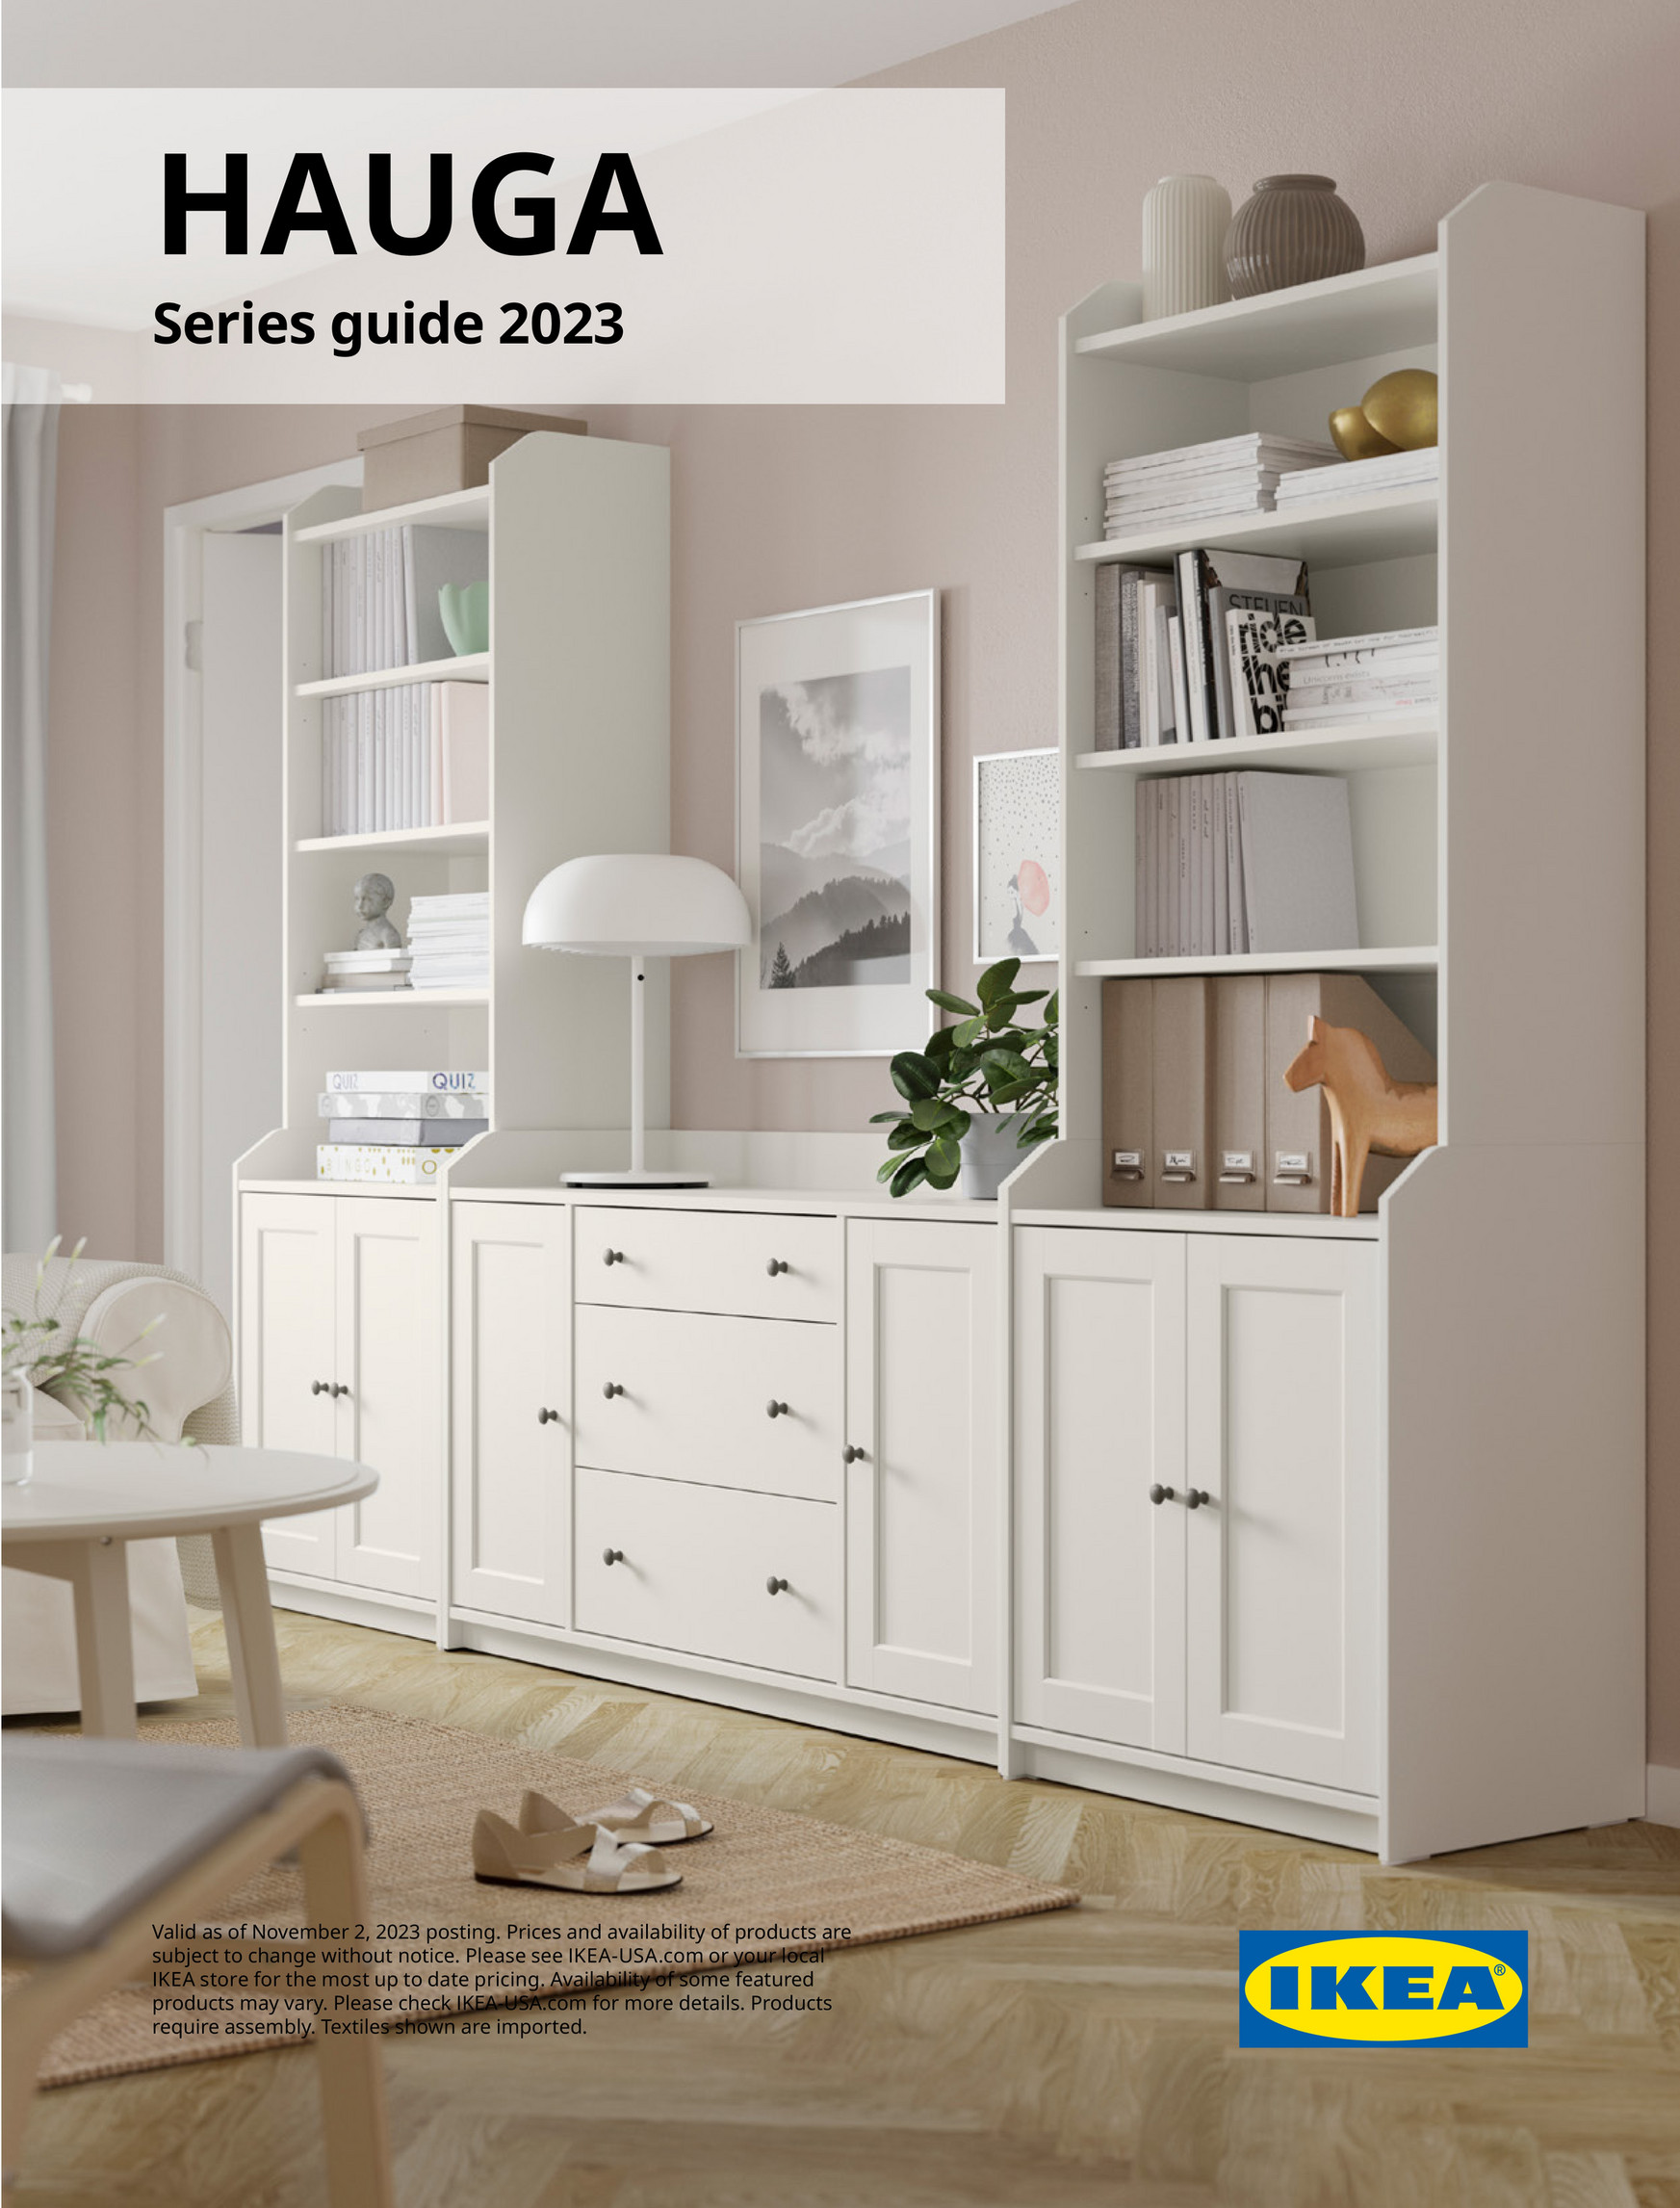 IKEA Must Haves Part III 🤩 In 2023, IKEA has introduced a captivating